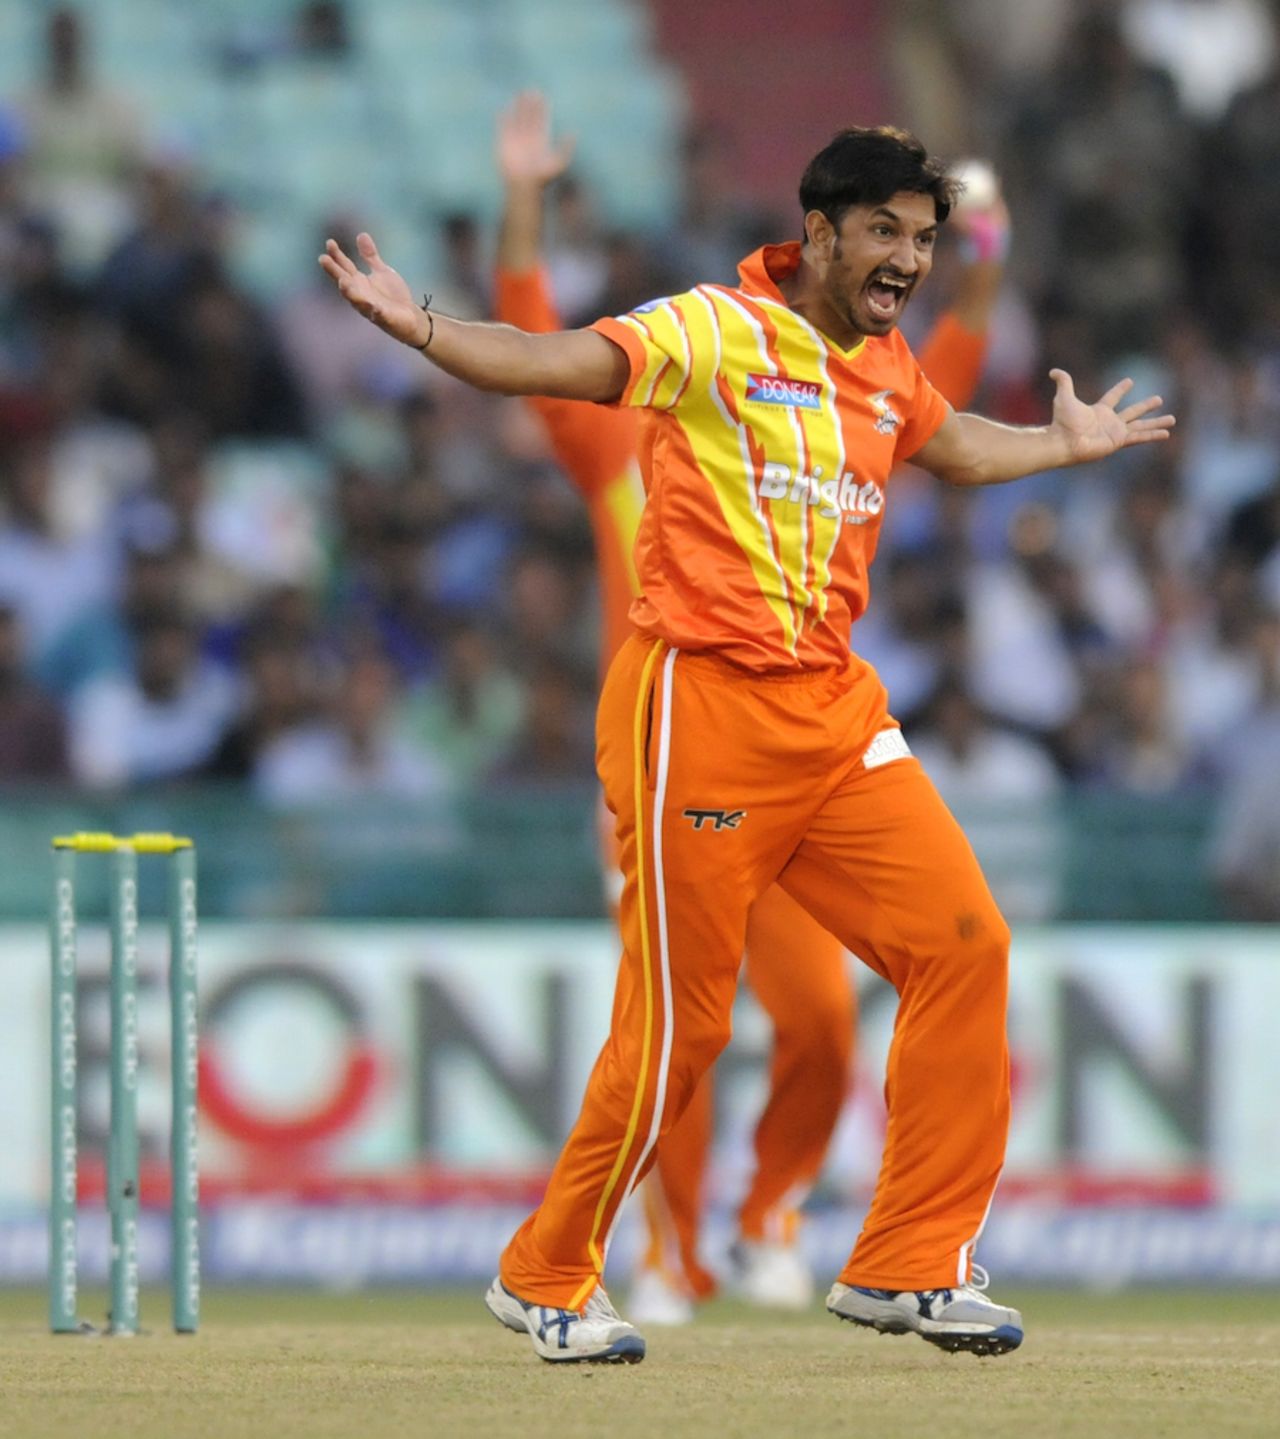 Aizaz Cheema took three wickets in four balls, Southern Express v Lahore Lions, CLT20 qualifier, Raipur, September 16, 2014